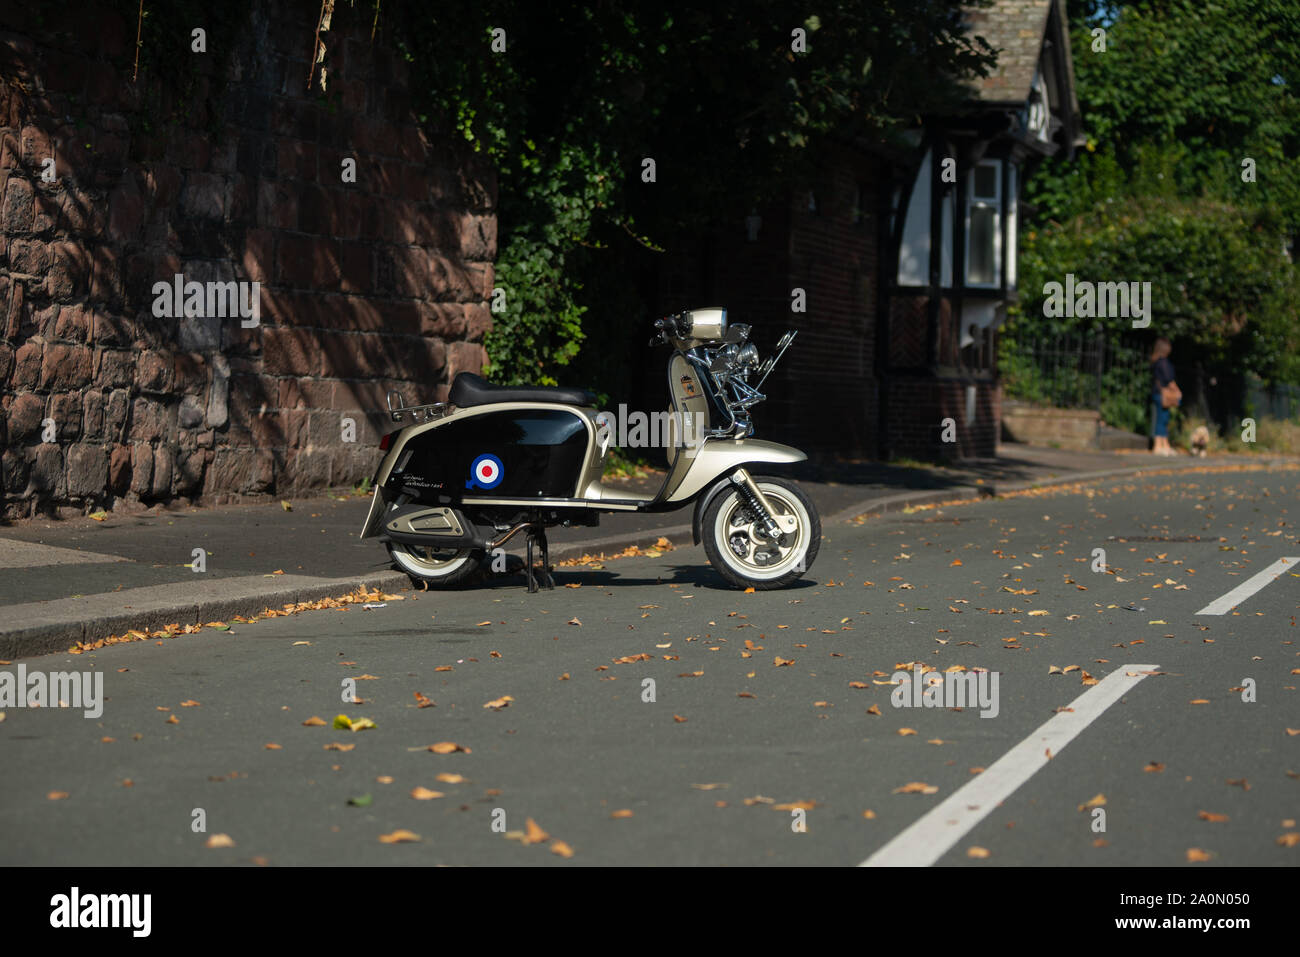 A Scomadi scooter parked on The Groves, a residential area at the side of the River Dee, Chester, Cheshire, UK. Stock Photo